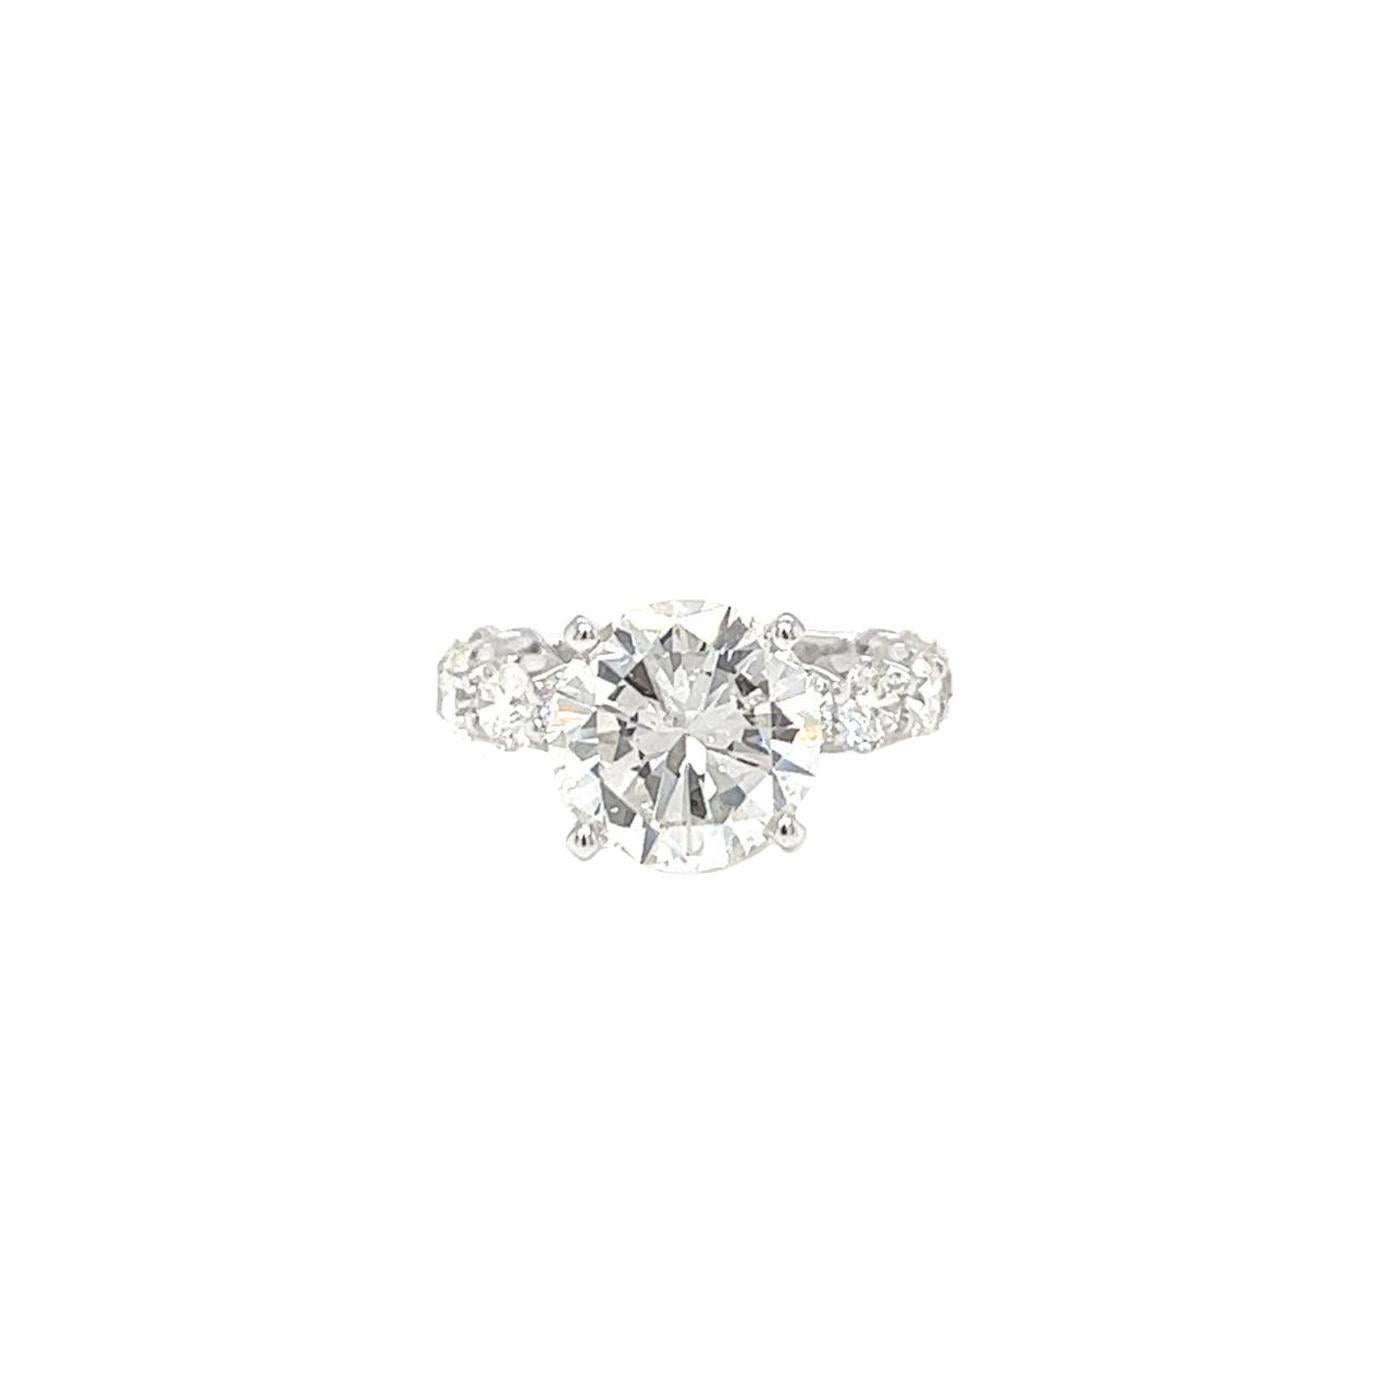 This Stunning Diamond ring is accompanied by a GIA Certified report certifying that 3.95ct Round Cut Natural Diamond with Si1 clarity, I color Diamond Ring is made in 18K White Gold, with 2ct side round Diamonds G Color and  VS1 clarity. This ring